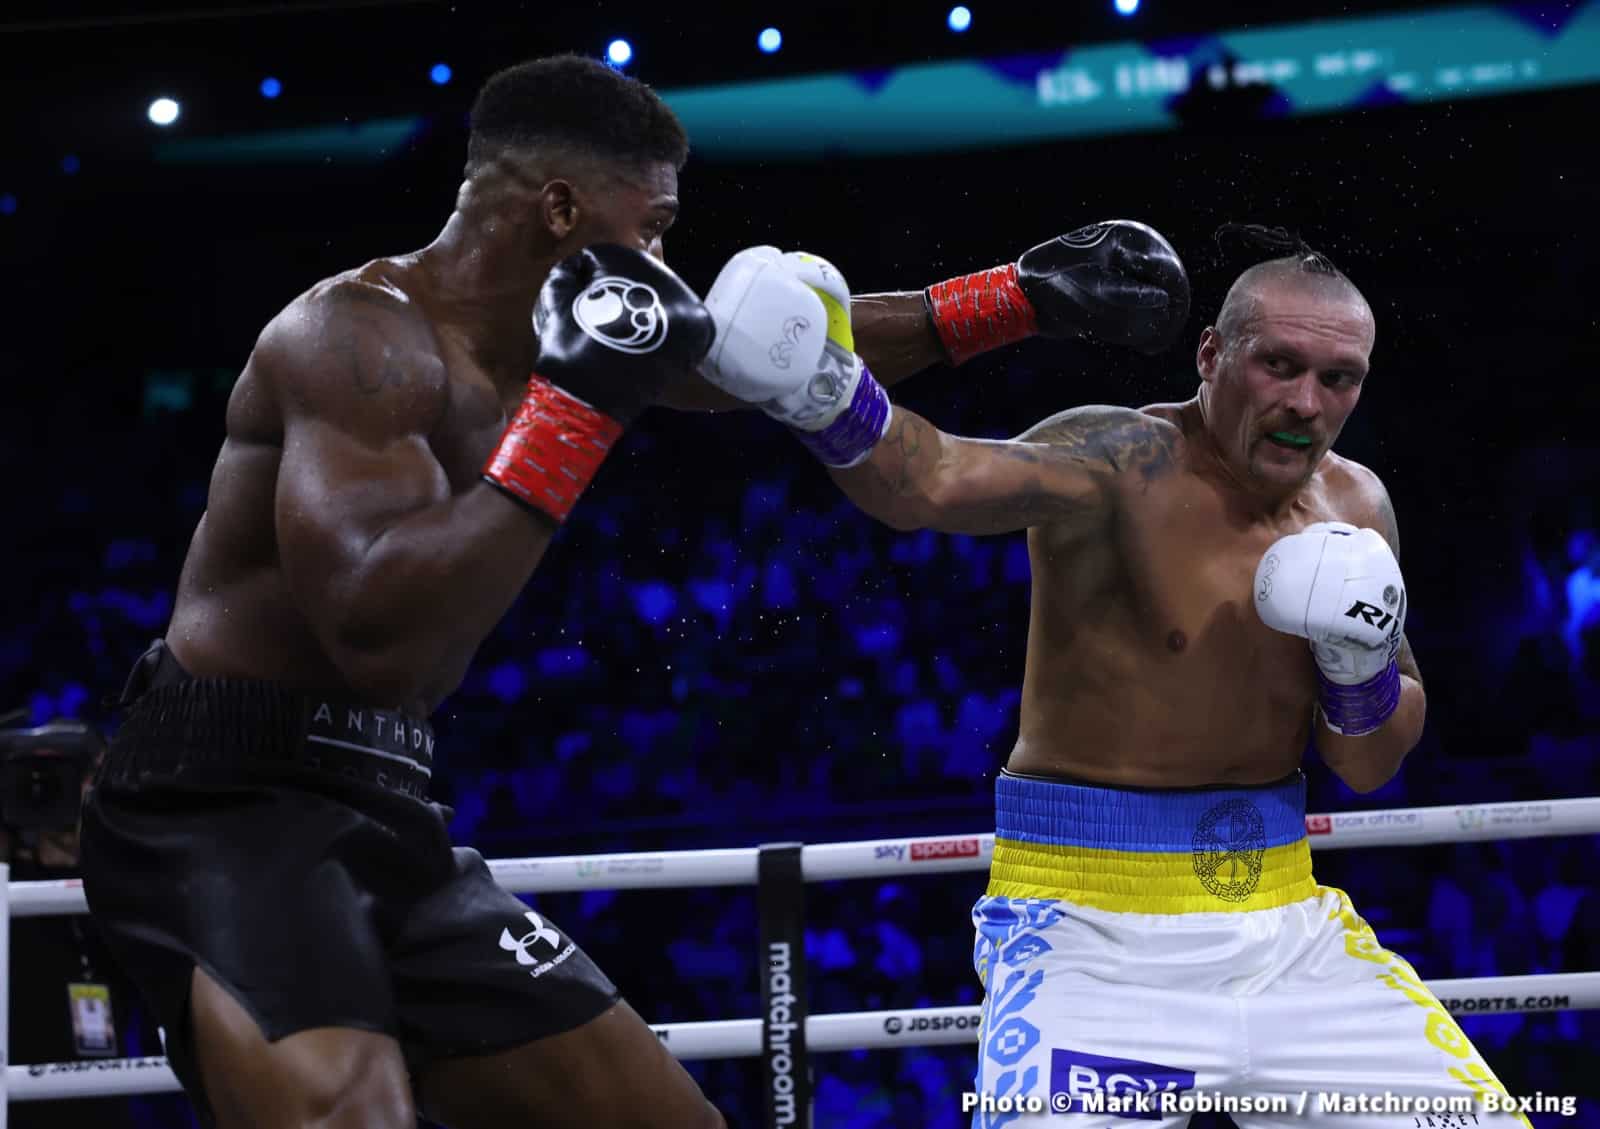 Usyk Repeats Decision Win Over Joshua; Yet One Judge Somehow Scores It For AJ!